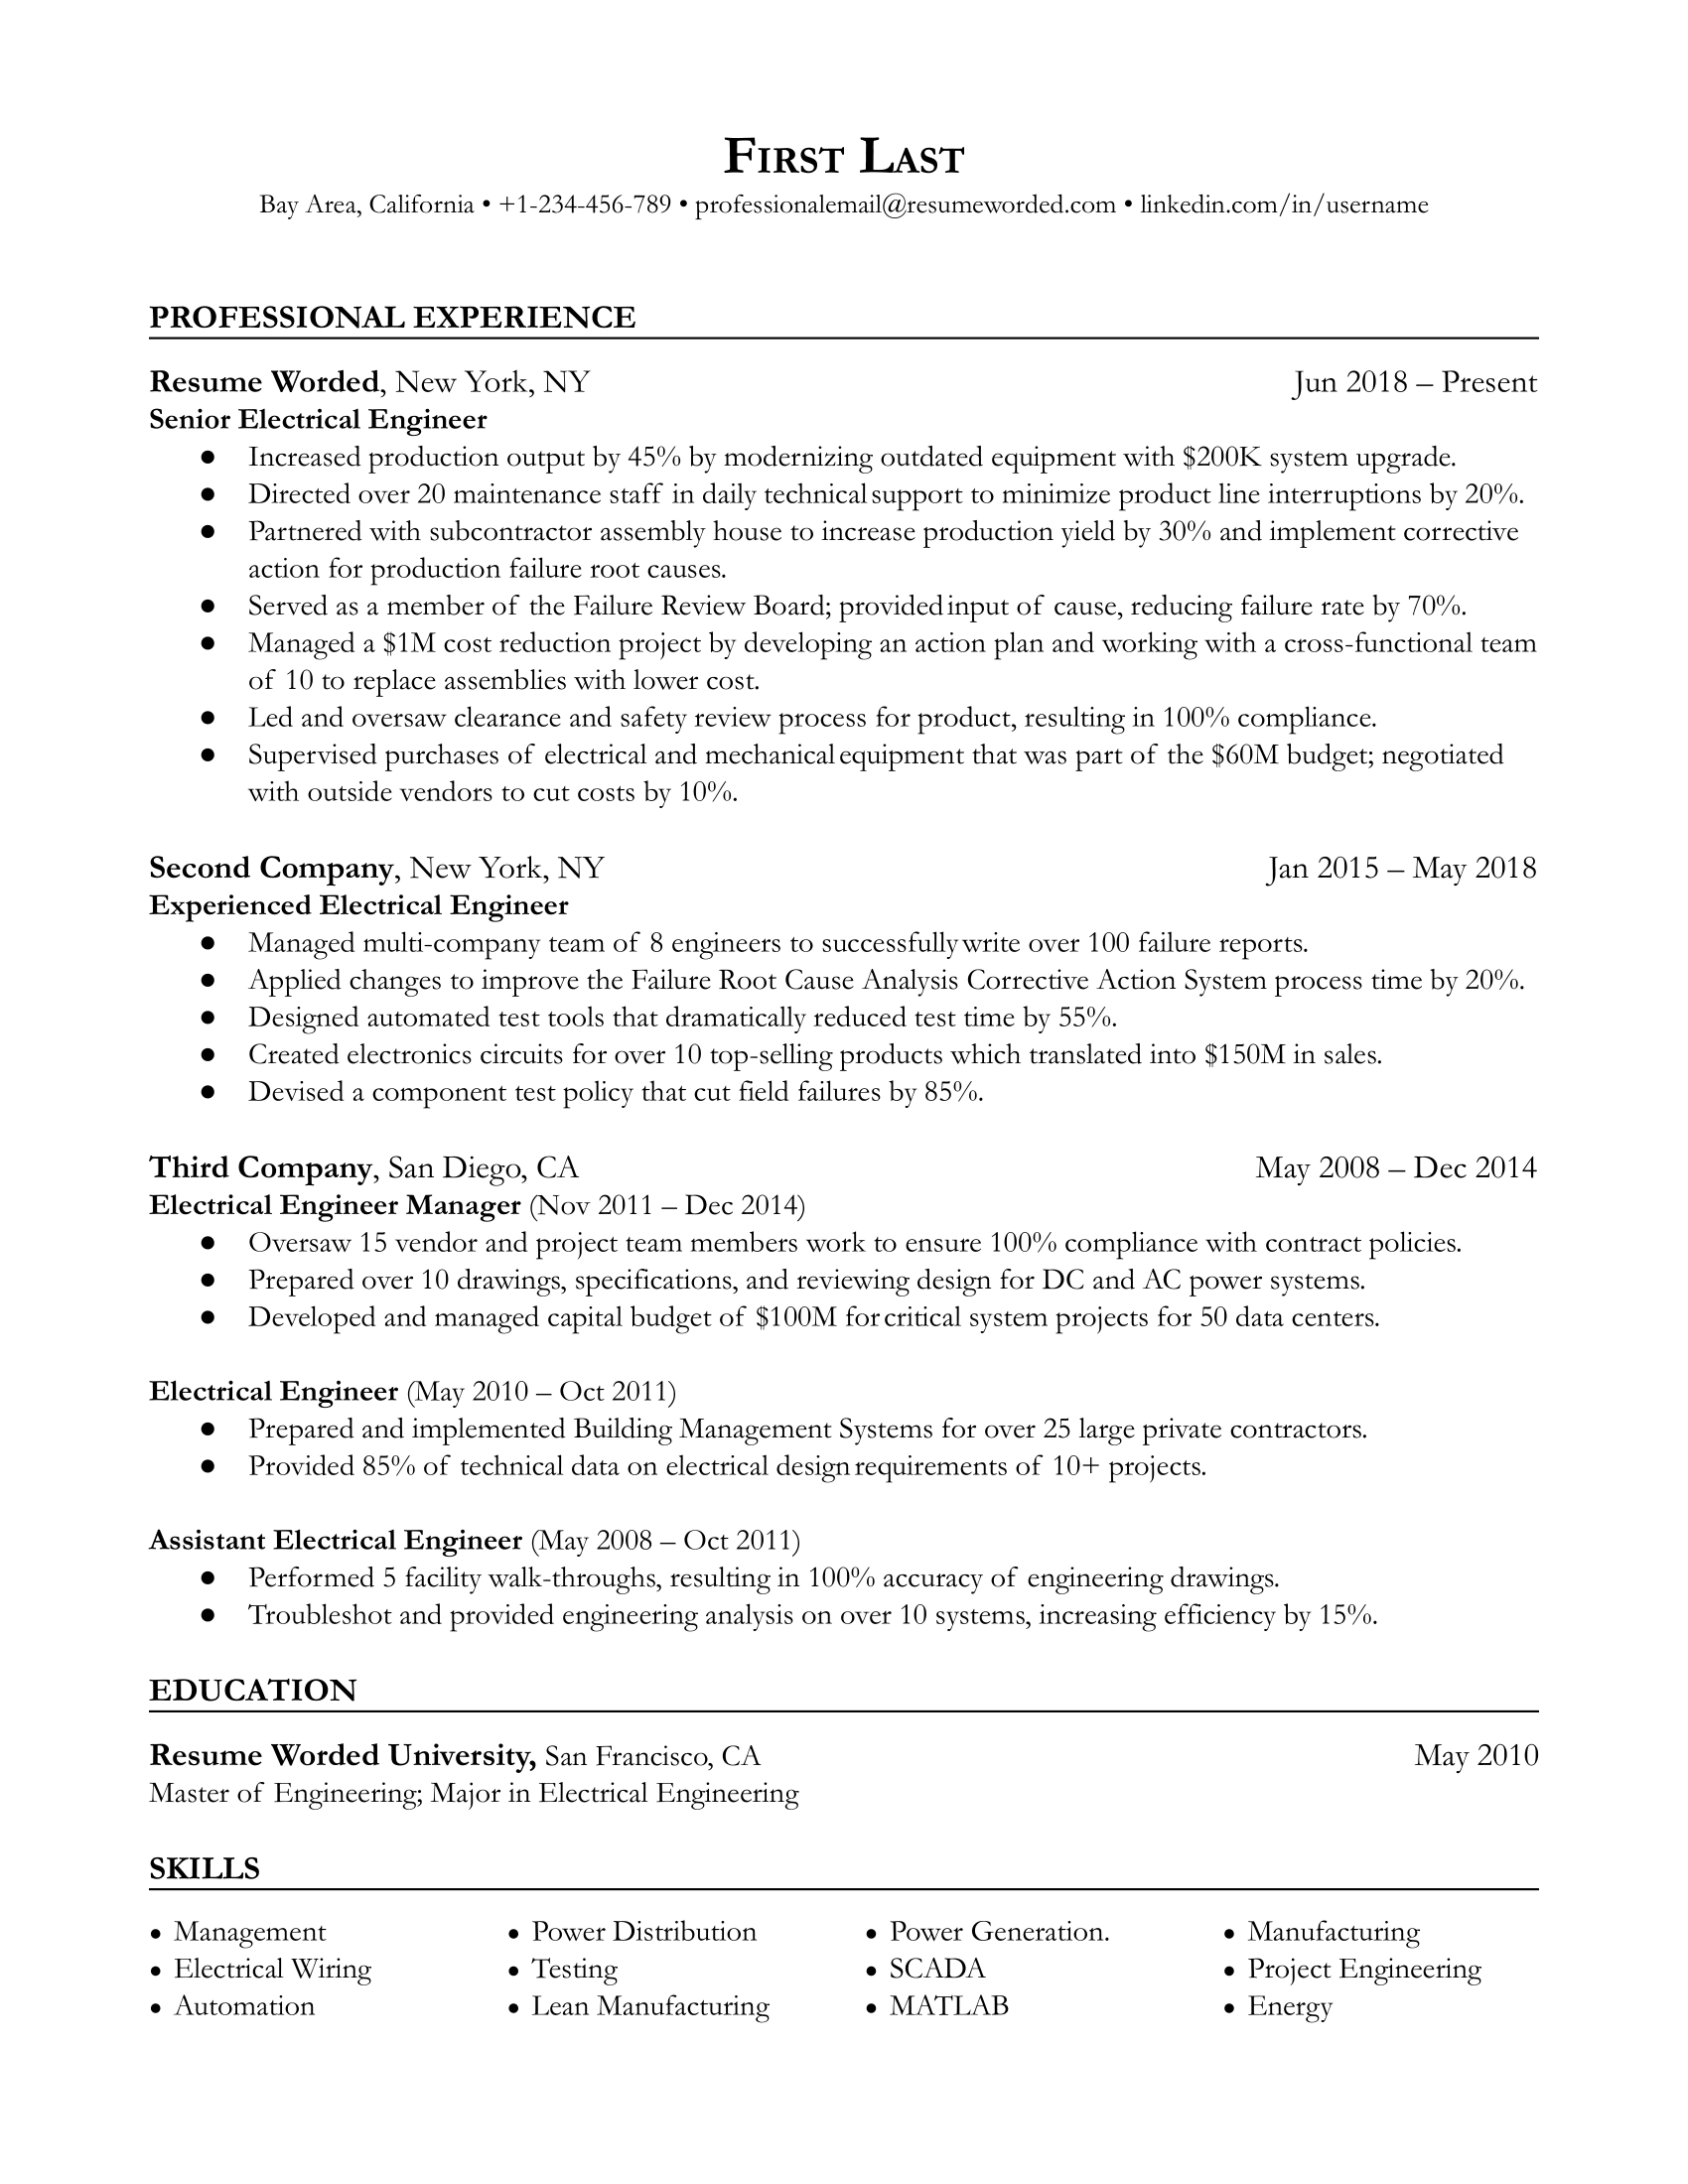 Alt text: A well-structured CV for a senior engineer role.